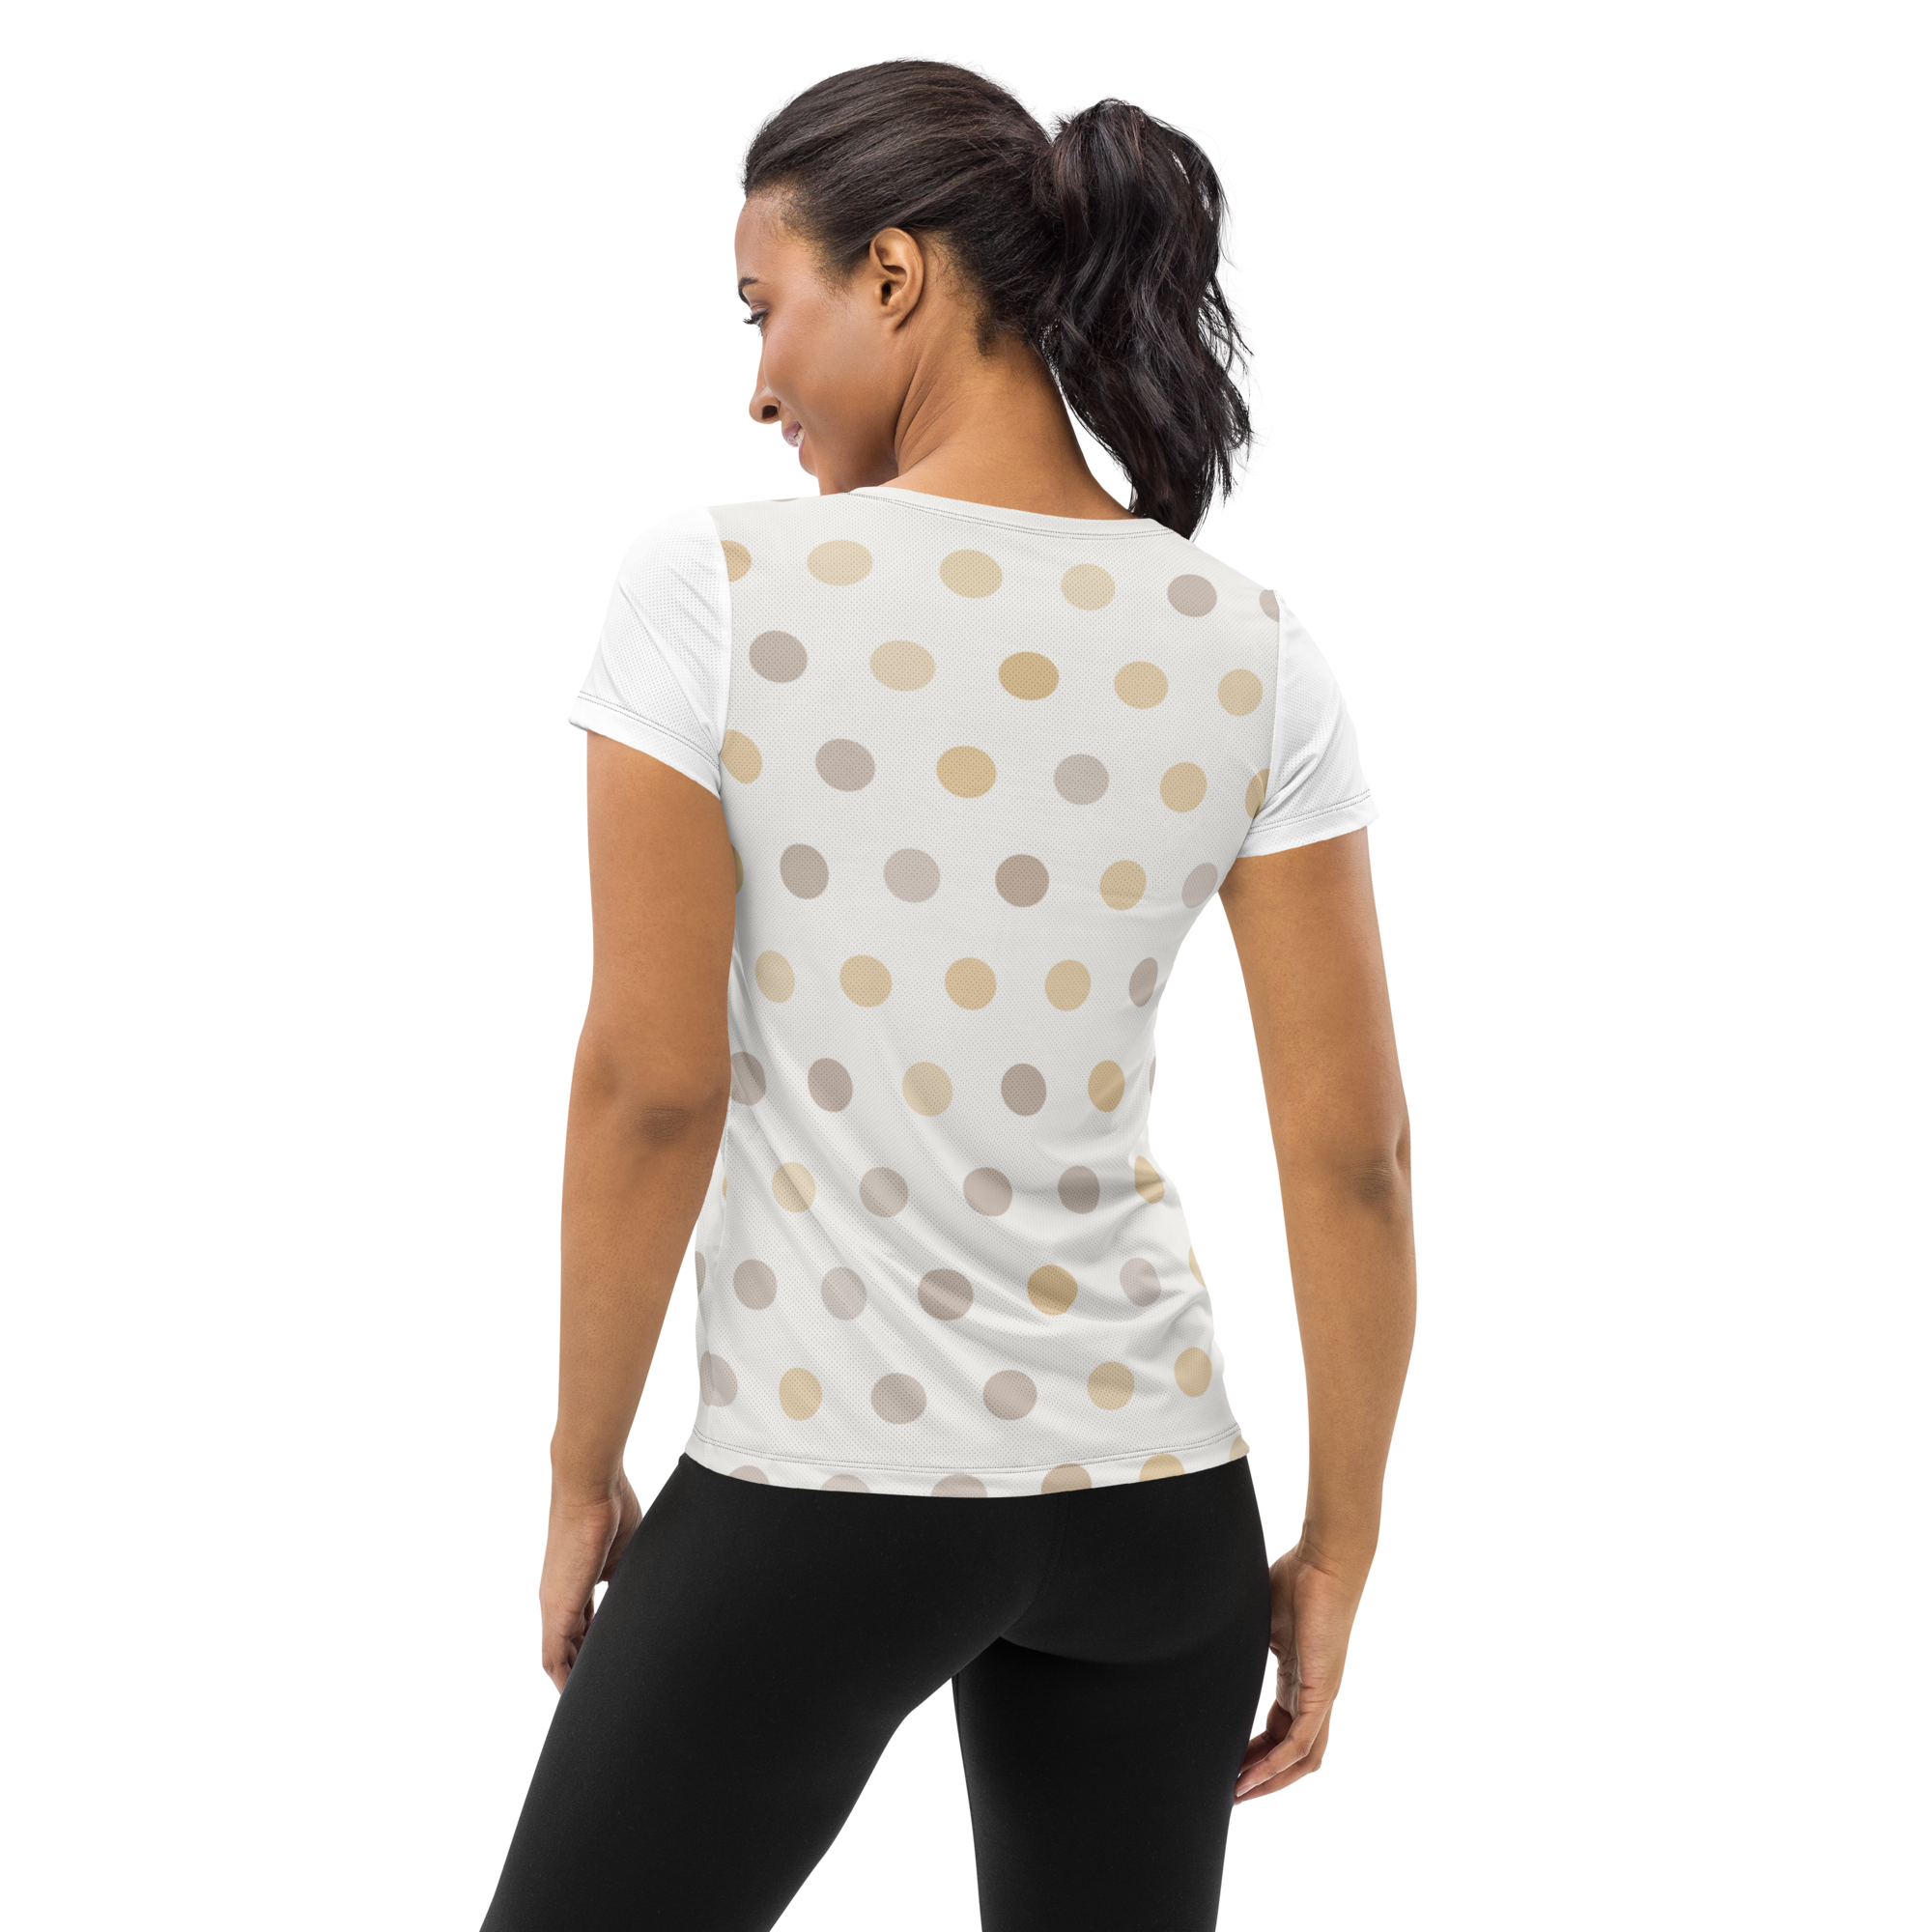 #03705290 - ALTINO Mesh Shirts - Gelato Collection - Stop Plastic Packaging - #PlasticCops - Apparel - Accessories - Clothing For Girls - Women Tops